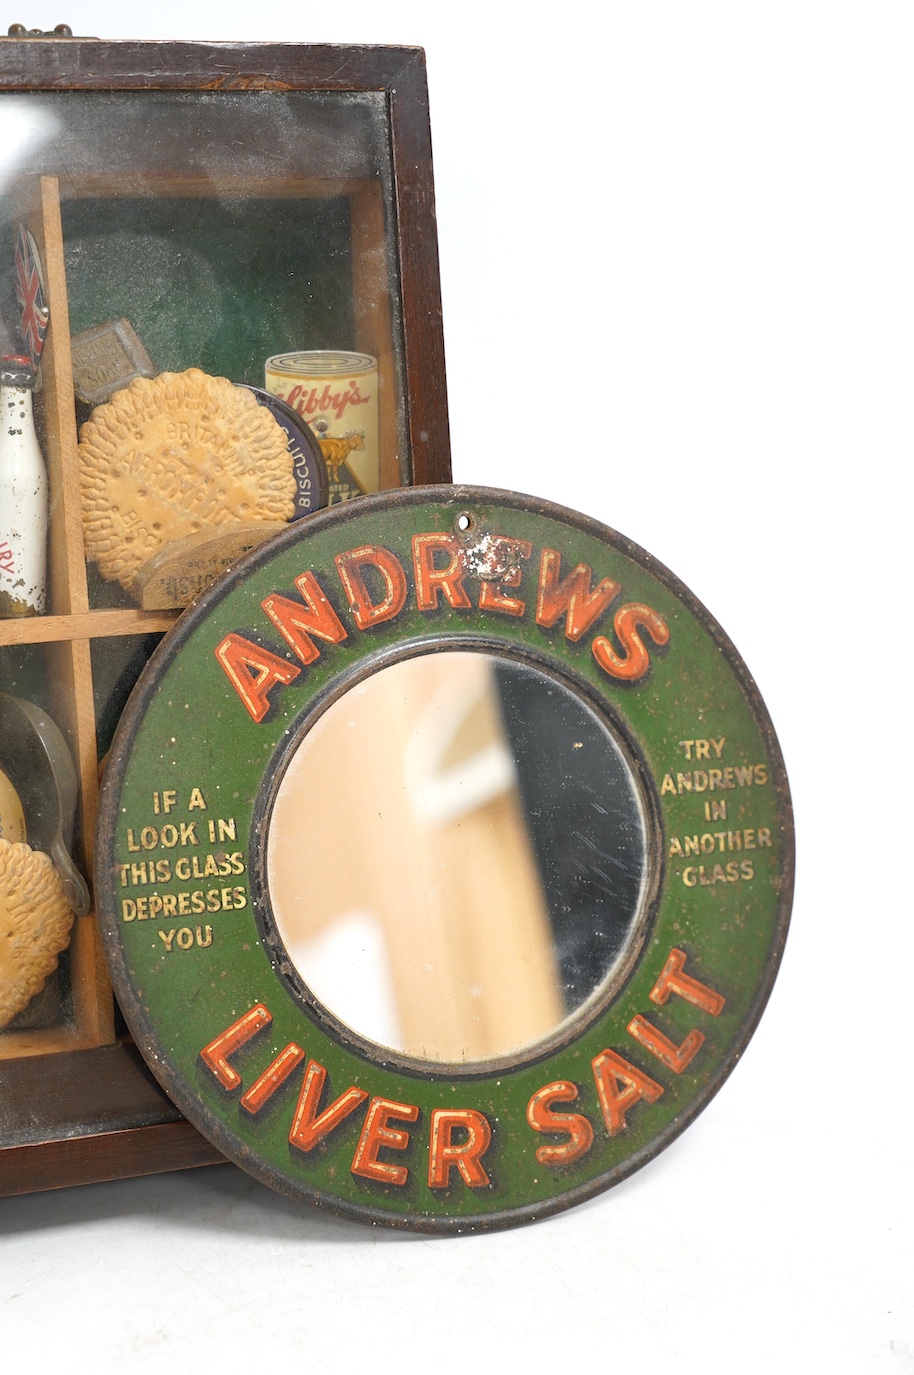 An early 20th century Andrews Liver Salt circular advertising mirror, 20cm diameter, together with a collection of novelty pocket mirrors, milk caps, etc. Condition - fair to good